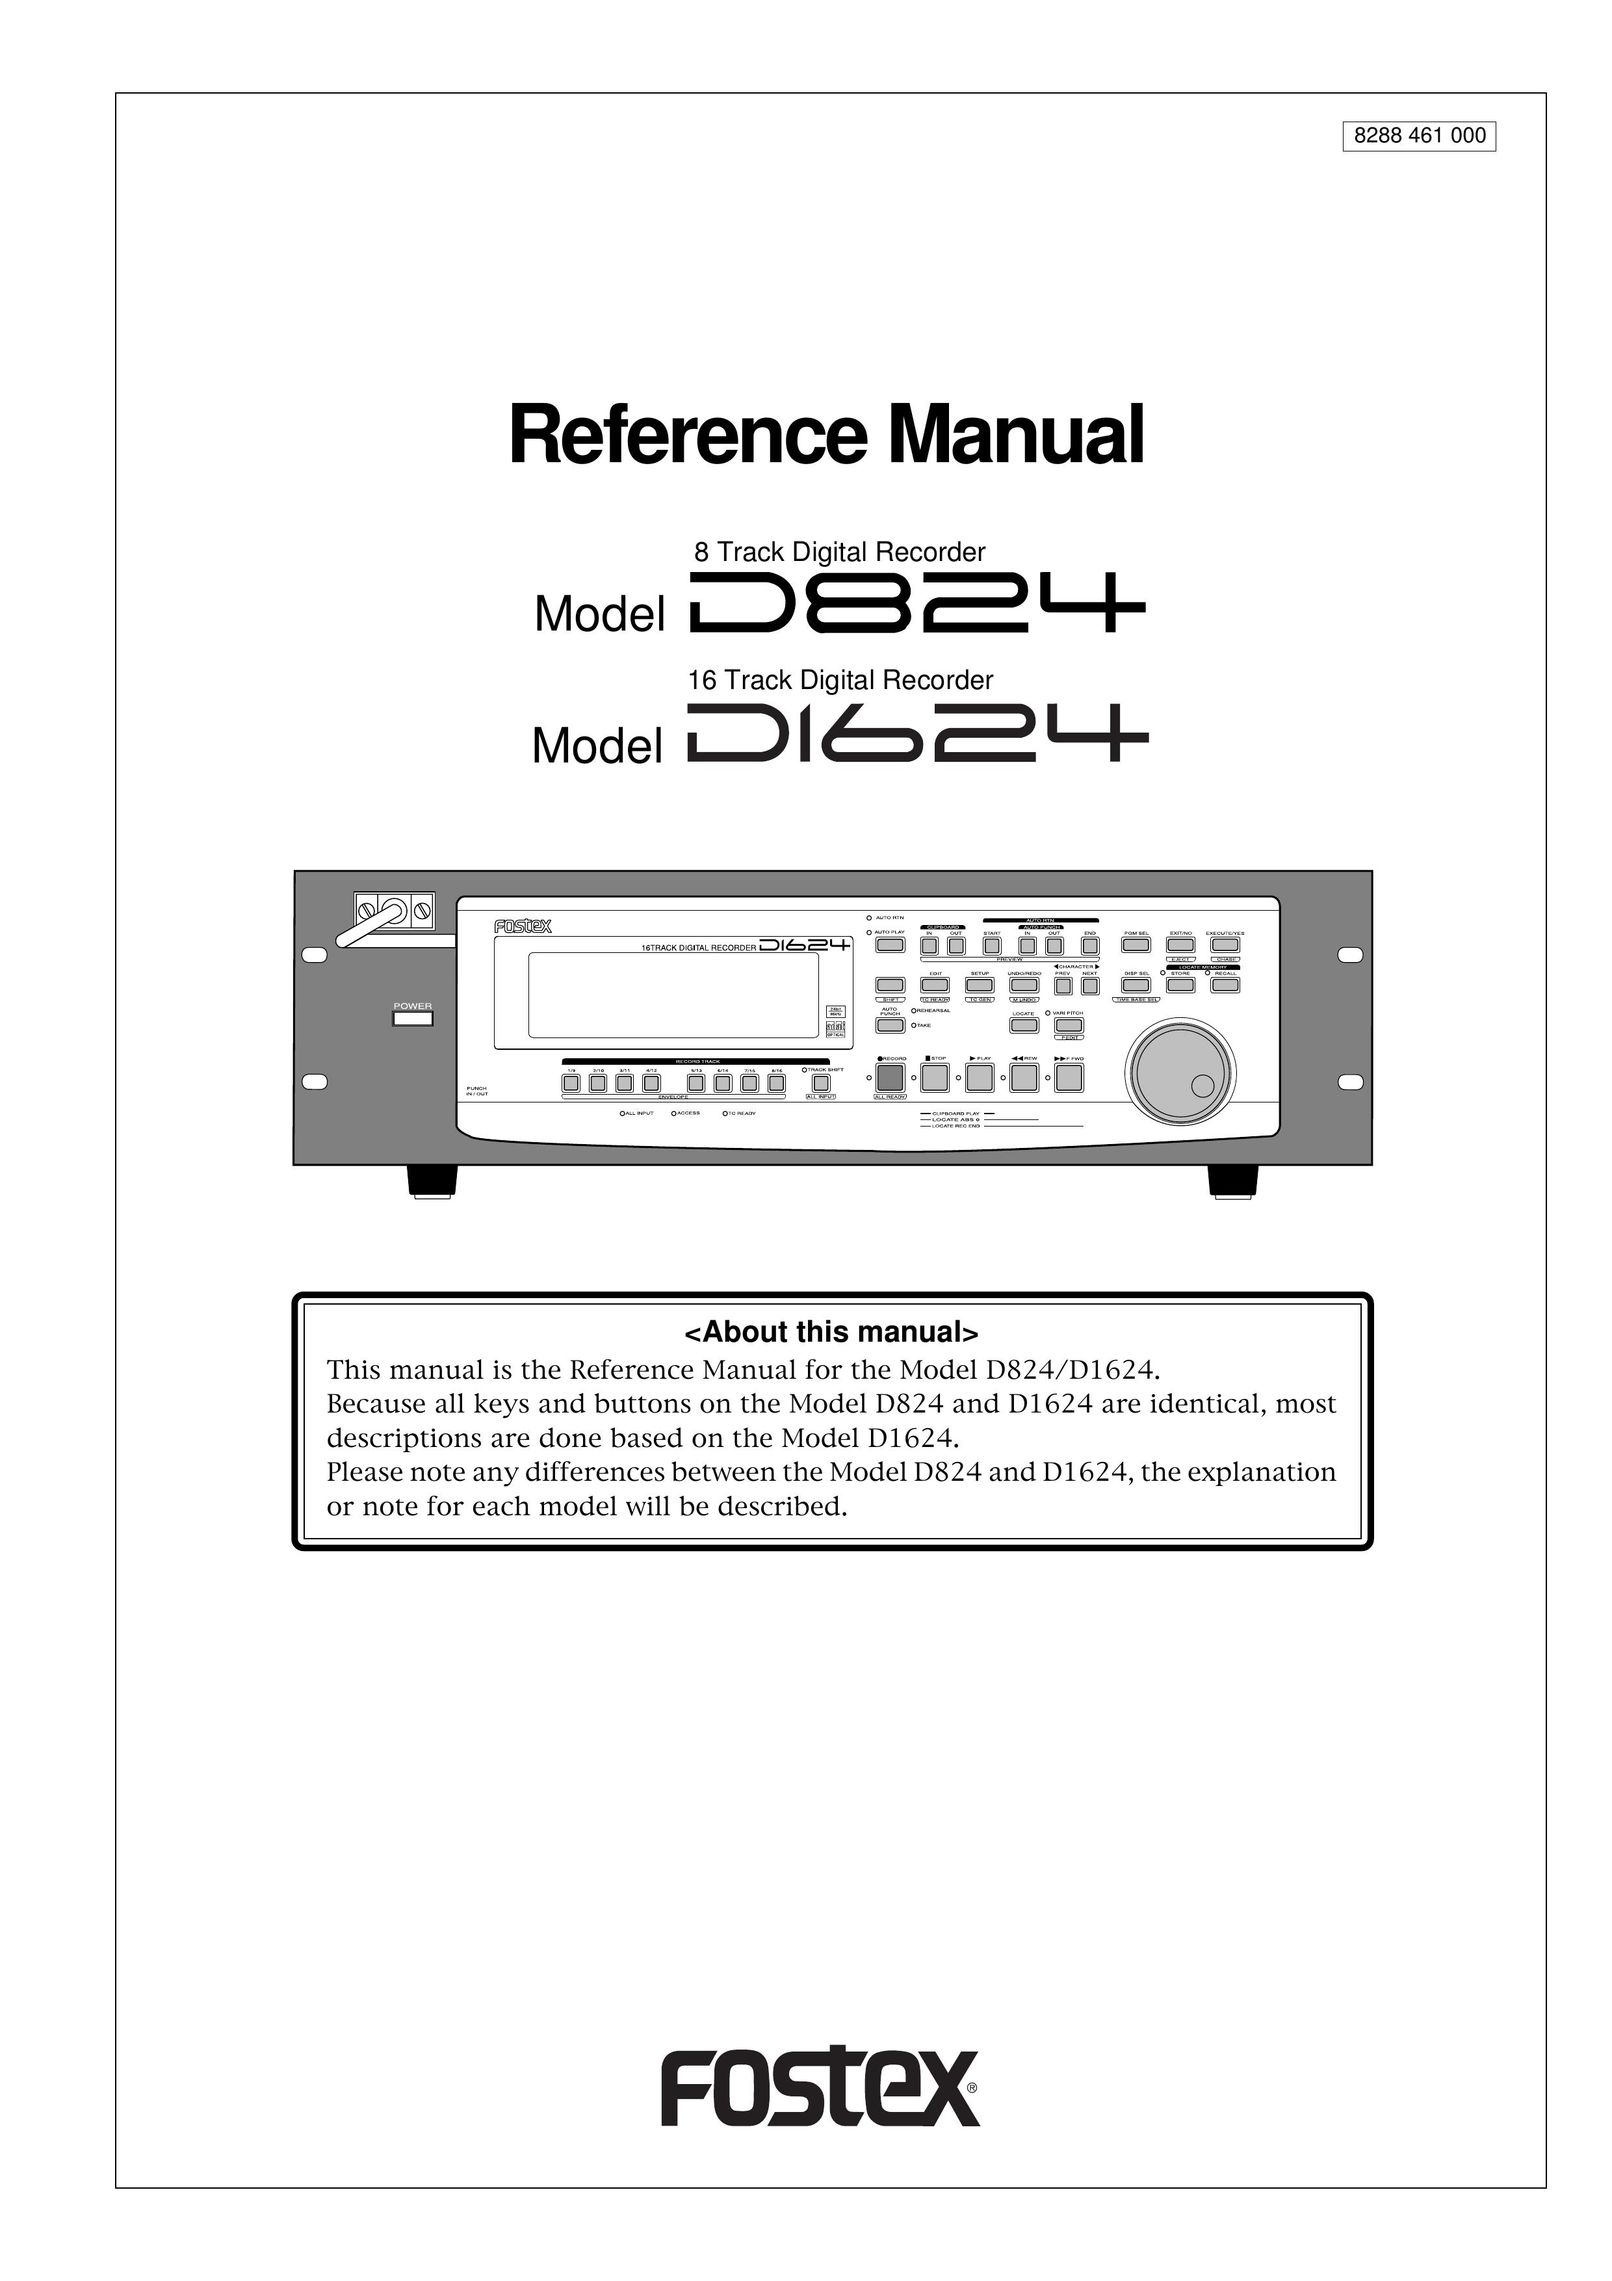 Fostex D1624 DVD Recorder User Manual (Page 1)